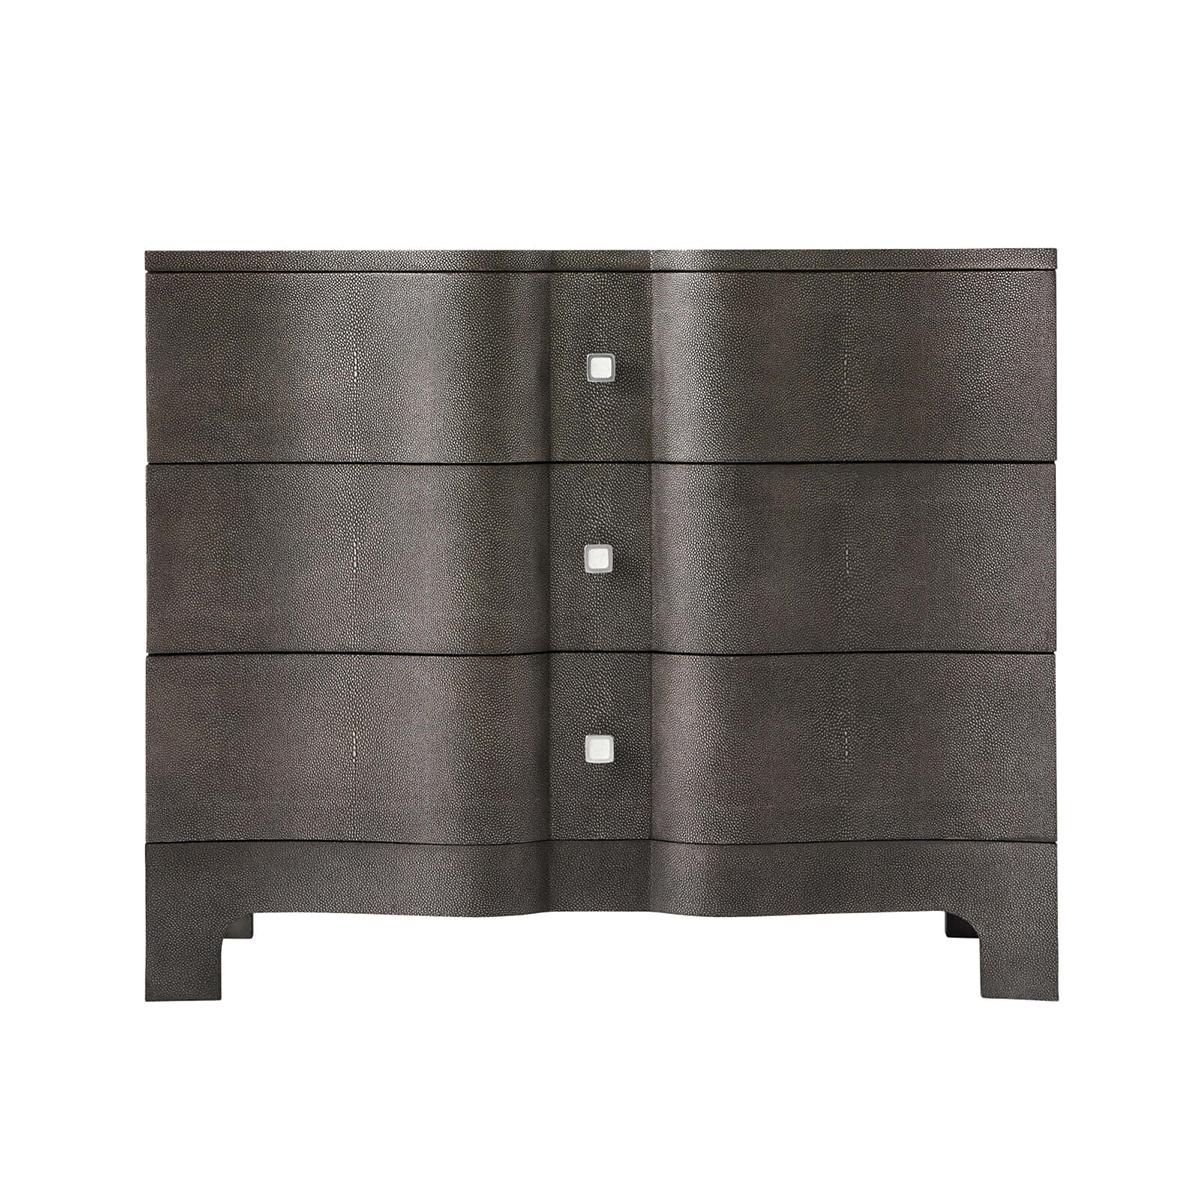 Modern Serpentine Leather Wrapped Nightstand with a shagreen embossed leather in our dark tempest finish, with polished nickel hardware and raised on bracket feet.

A wonderful modern interpretation of a Rococo Chippendale design from the 18th